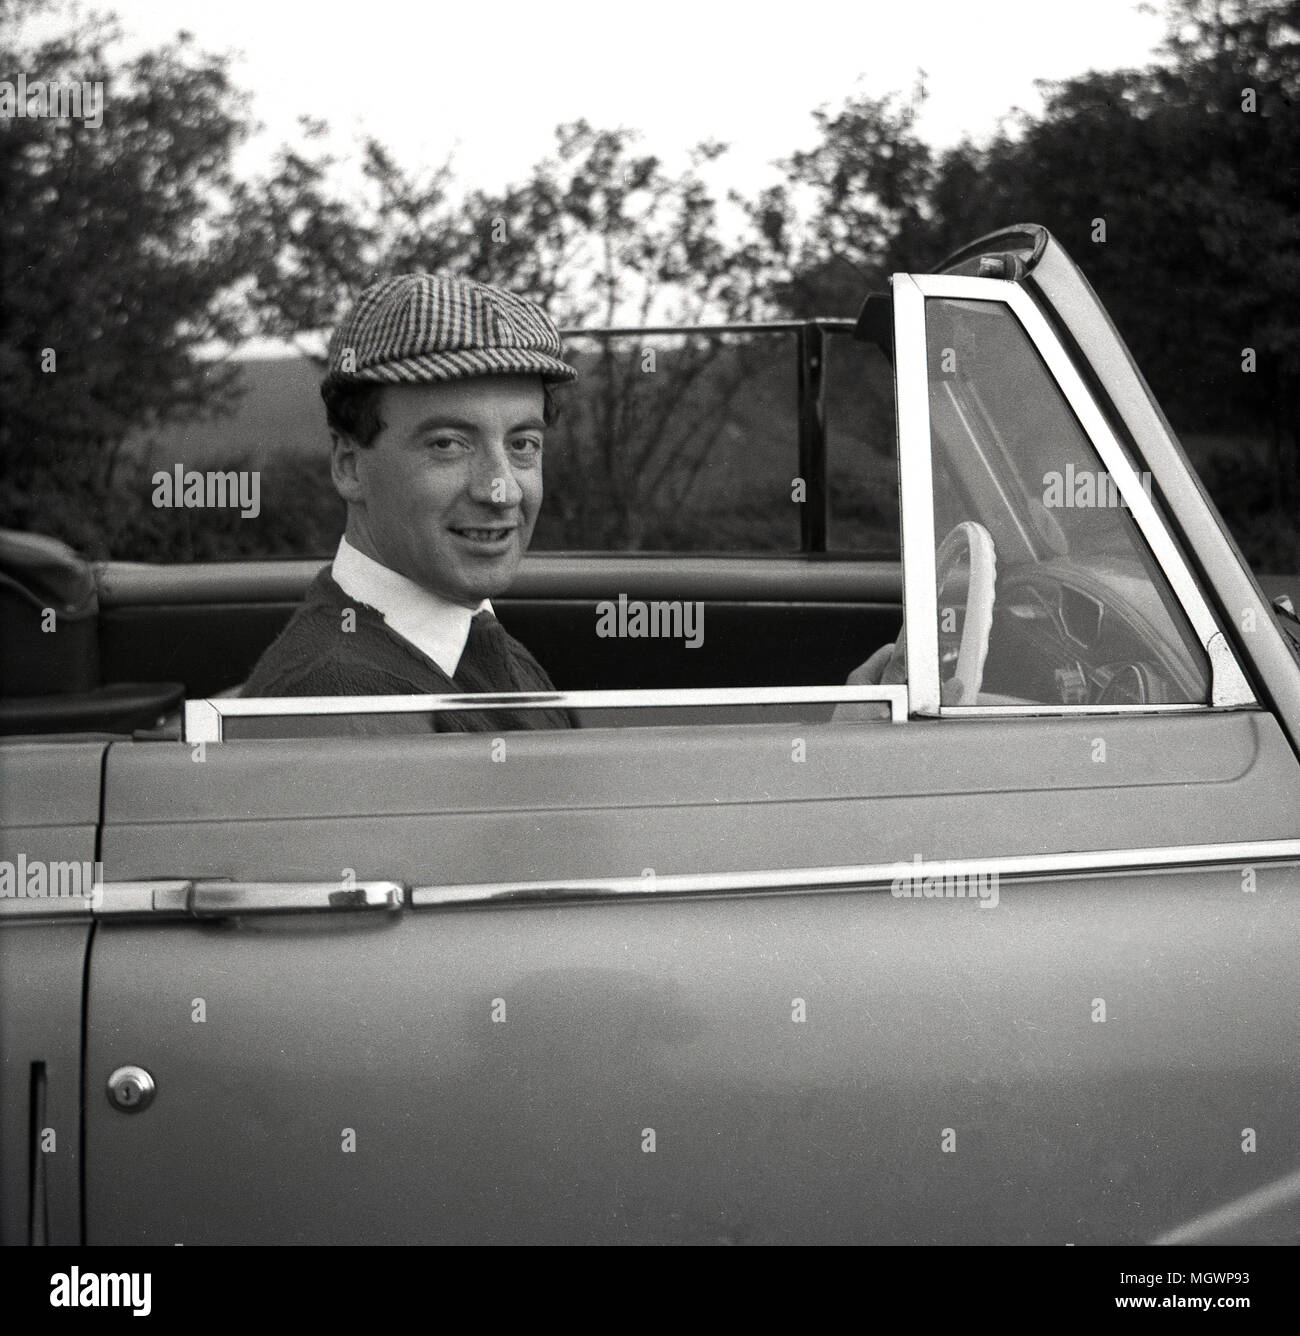 1955, historical, adult male driver sitting hands at the wheel of his soft-top motorcar wearing a fashionable 'sportsmans' version of the famous deerstalker cloth cap, made popular by the fiction detective, Sherlock Holmes, England, UK. Stock Photo